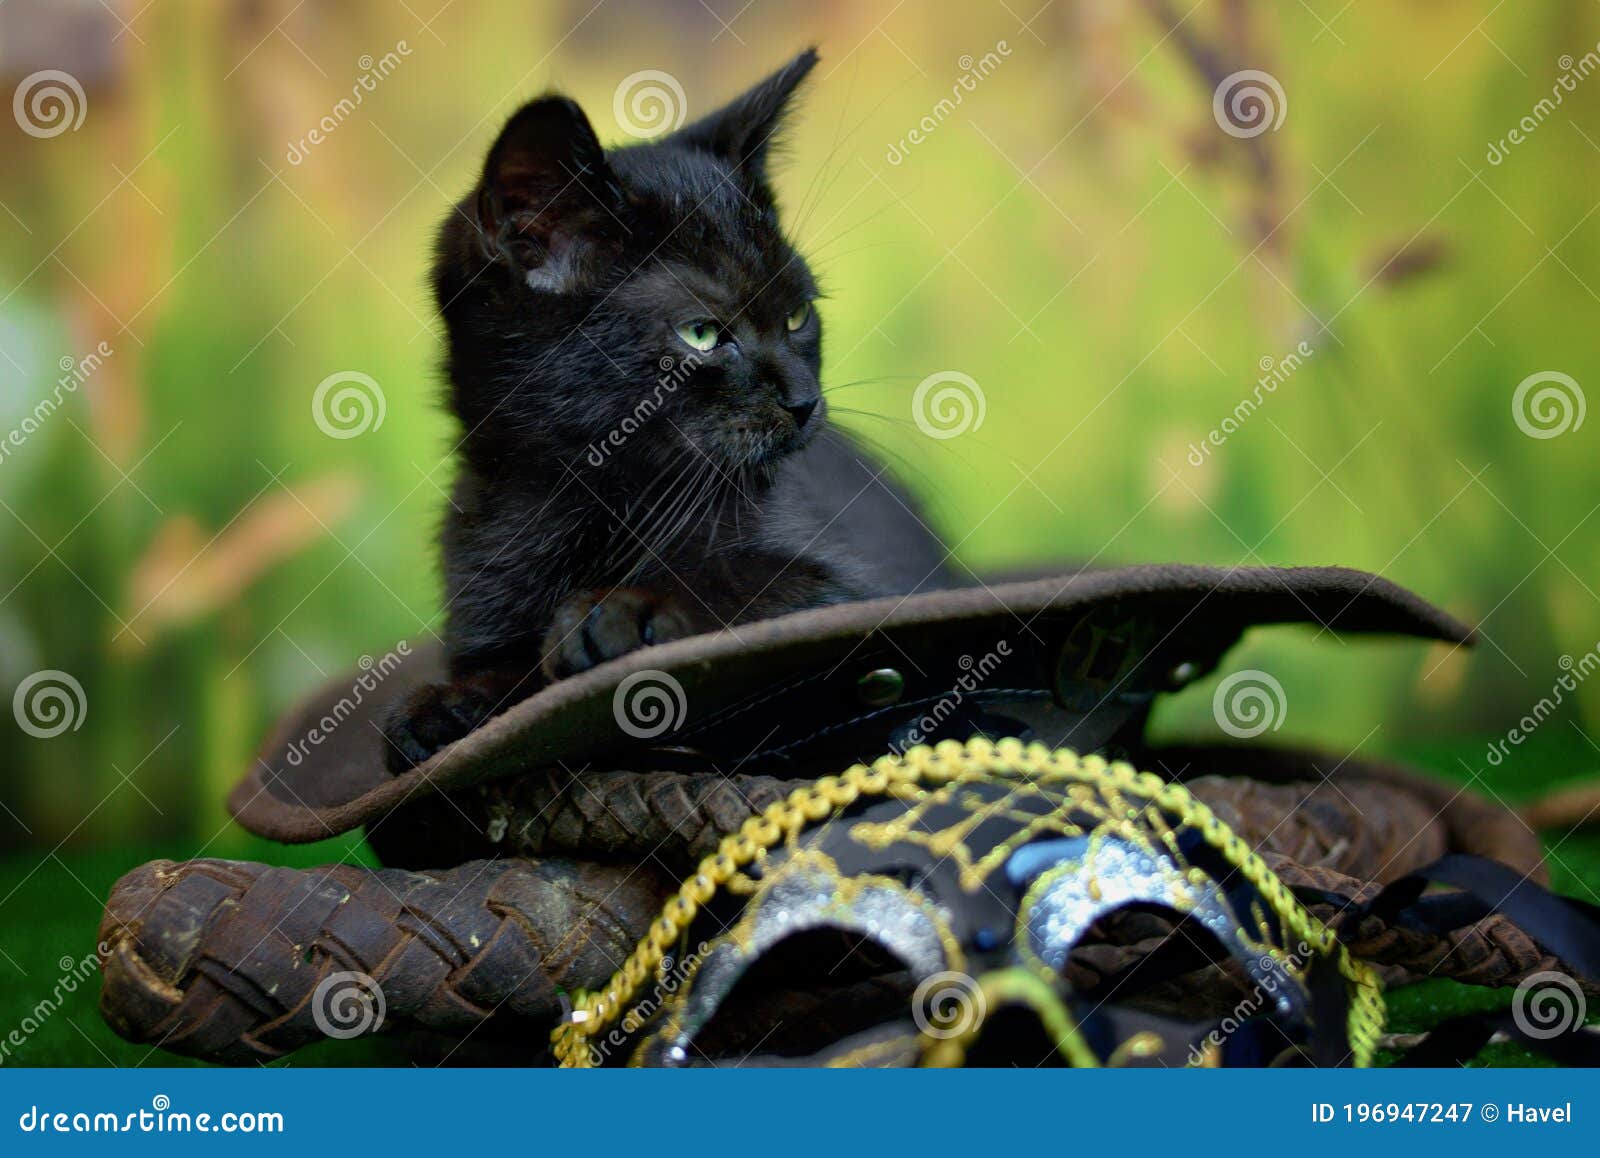 black cat sitting on a green background with a hat and a whip